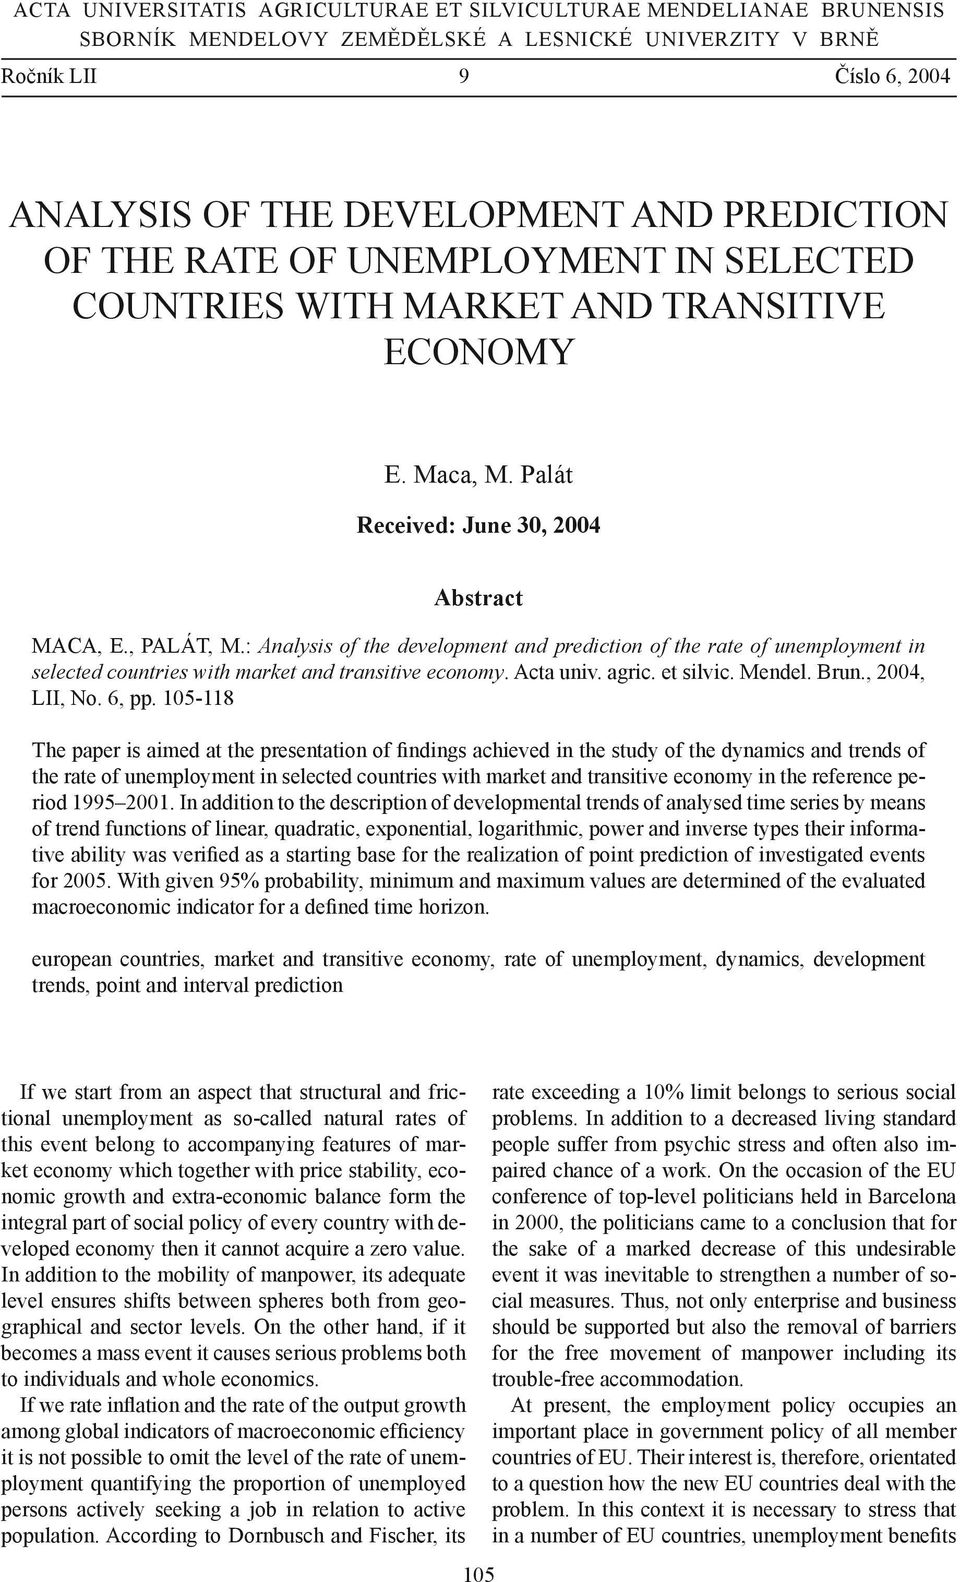 : Analysis of the development and prediction of the rate of unemployment in selected countries with market and transitive economy. Acta univ. agric. et silvic. Mendel. Brun., 2004, LII, No. 6, pp.